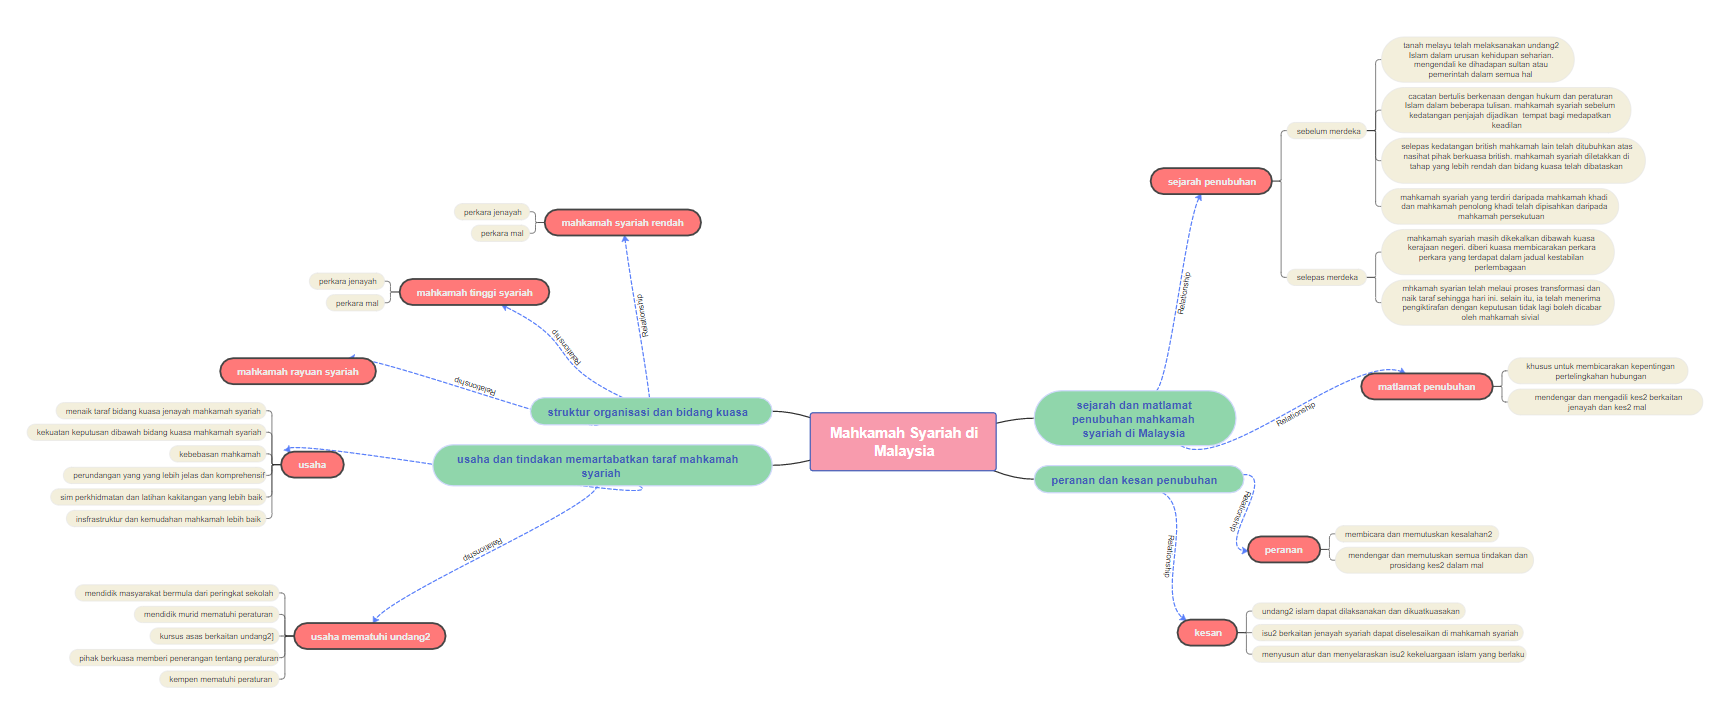 Mind Map for Syariah Courts in Malaysia